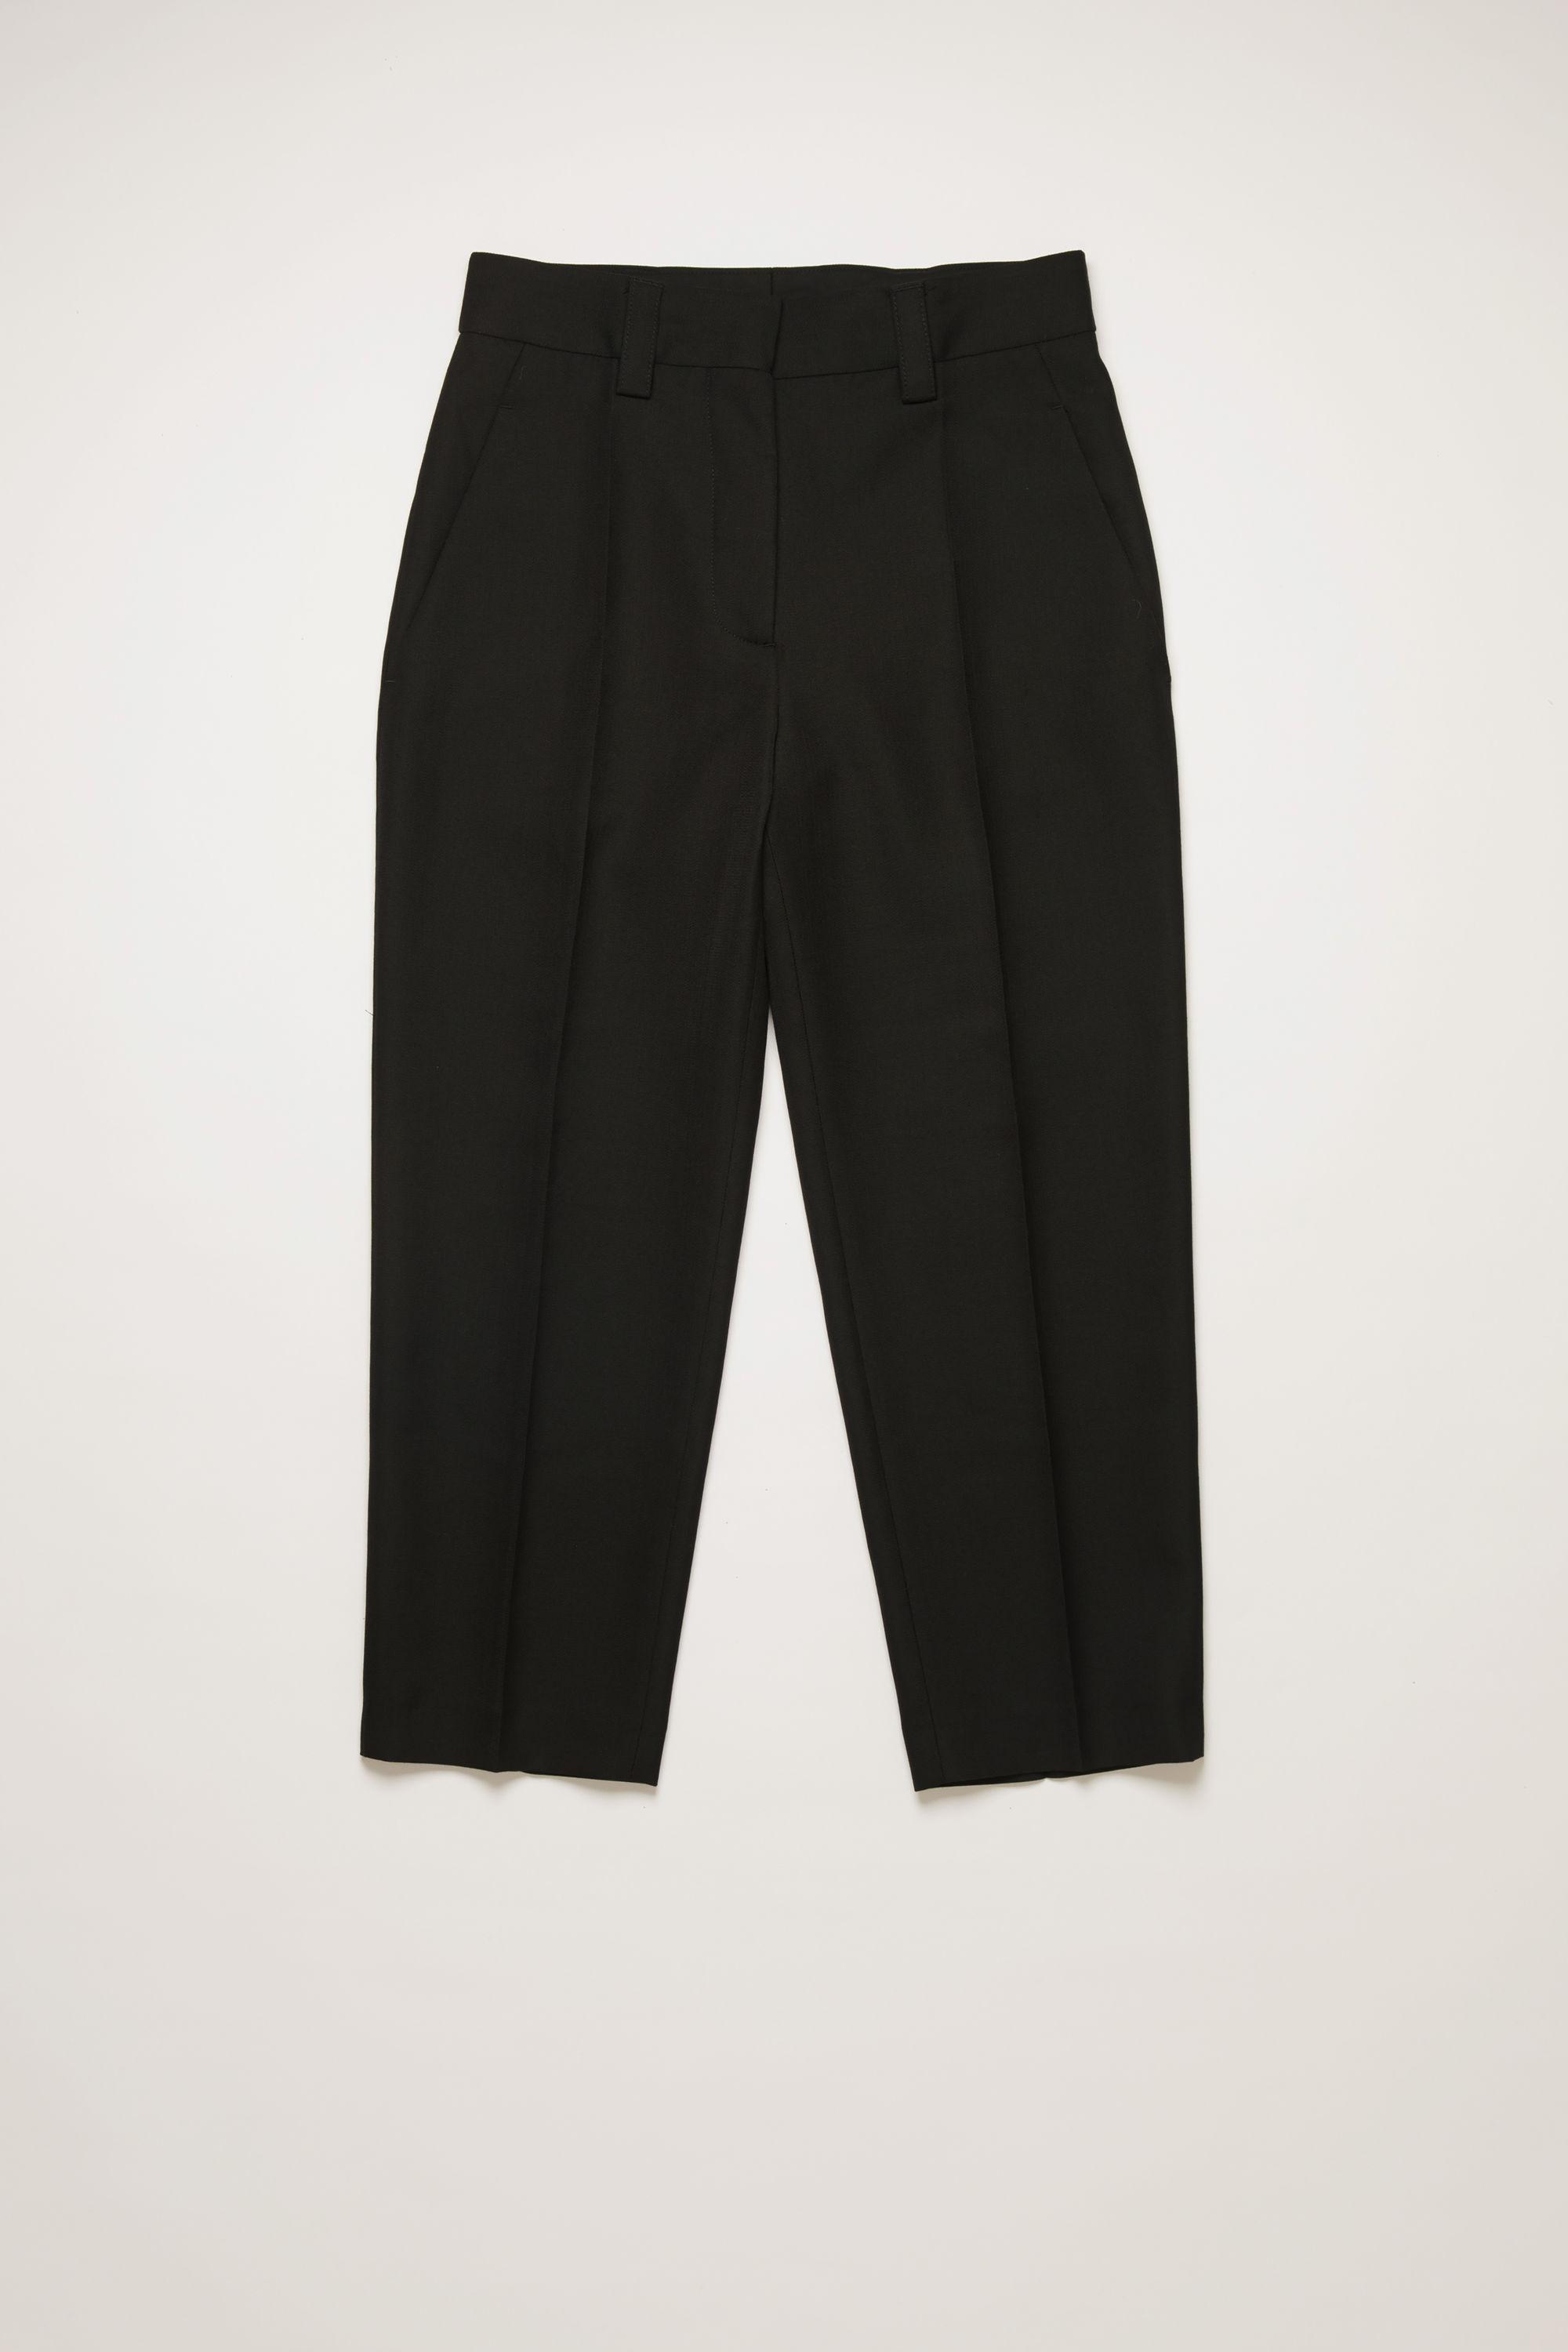 Acne Studios Synthetic Fn-wn-trou000159 Black Cropped Trousers - Lyst